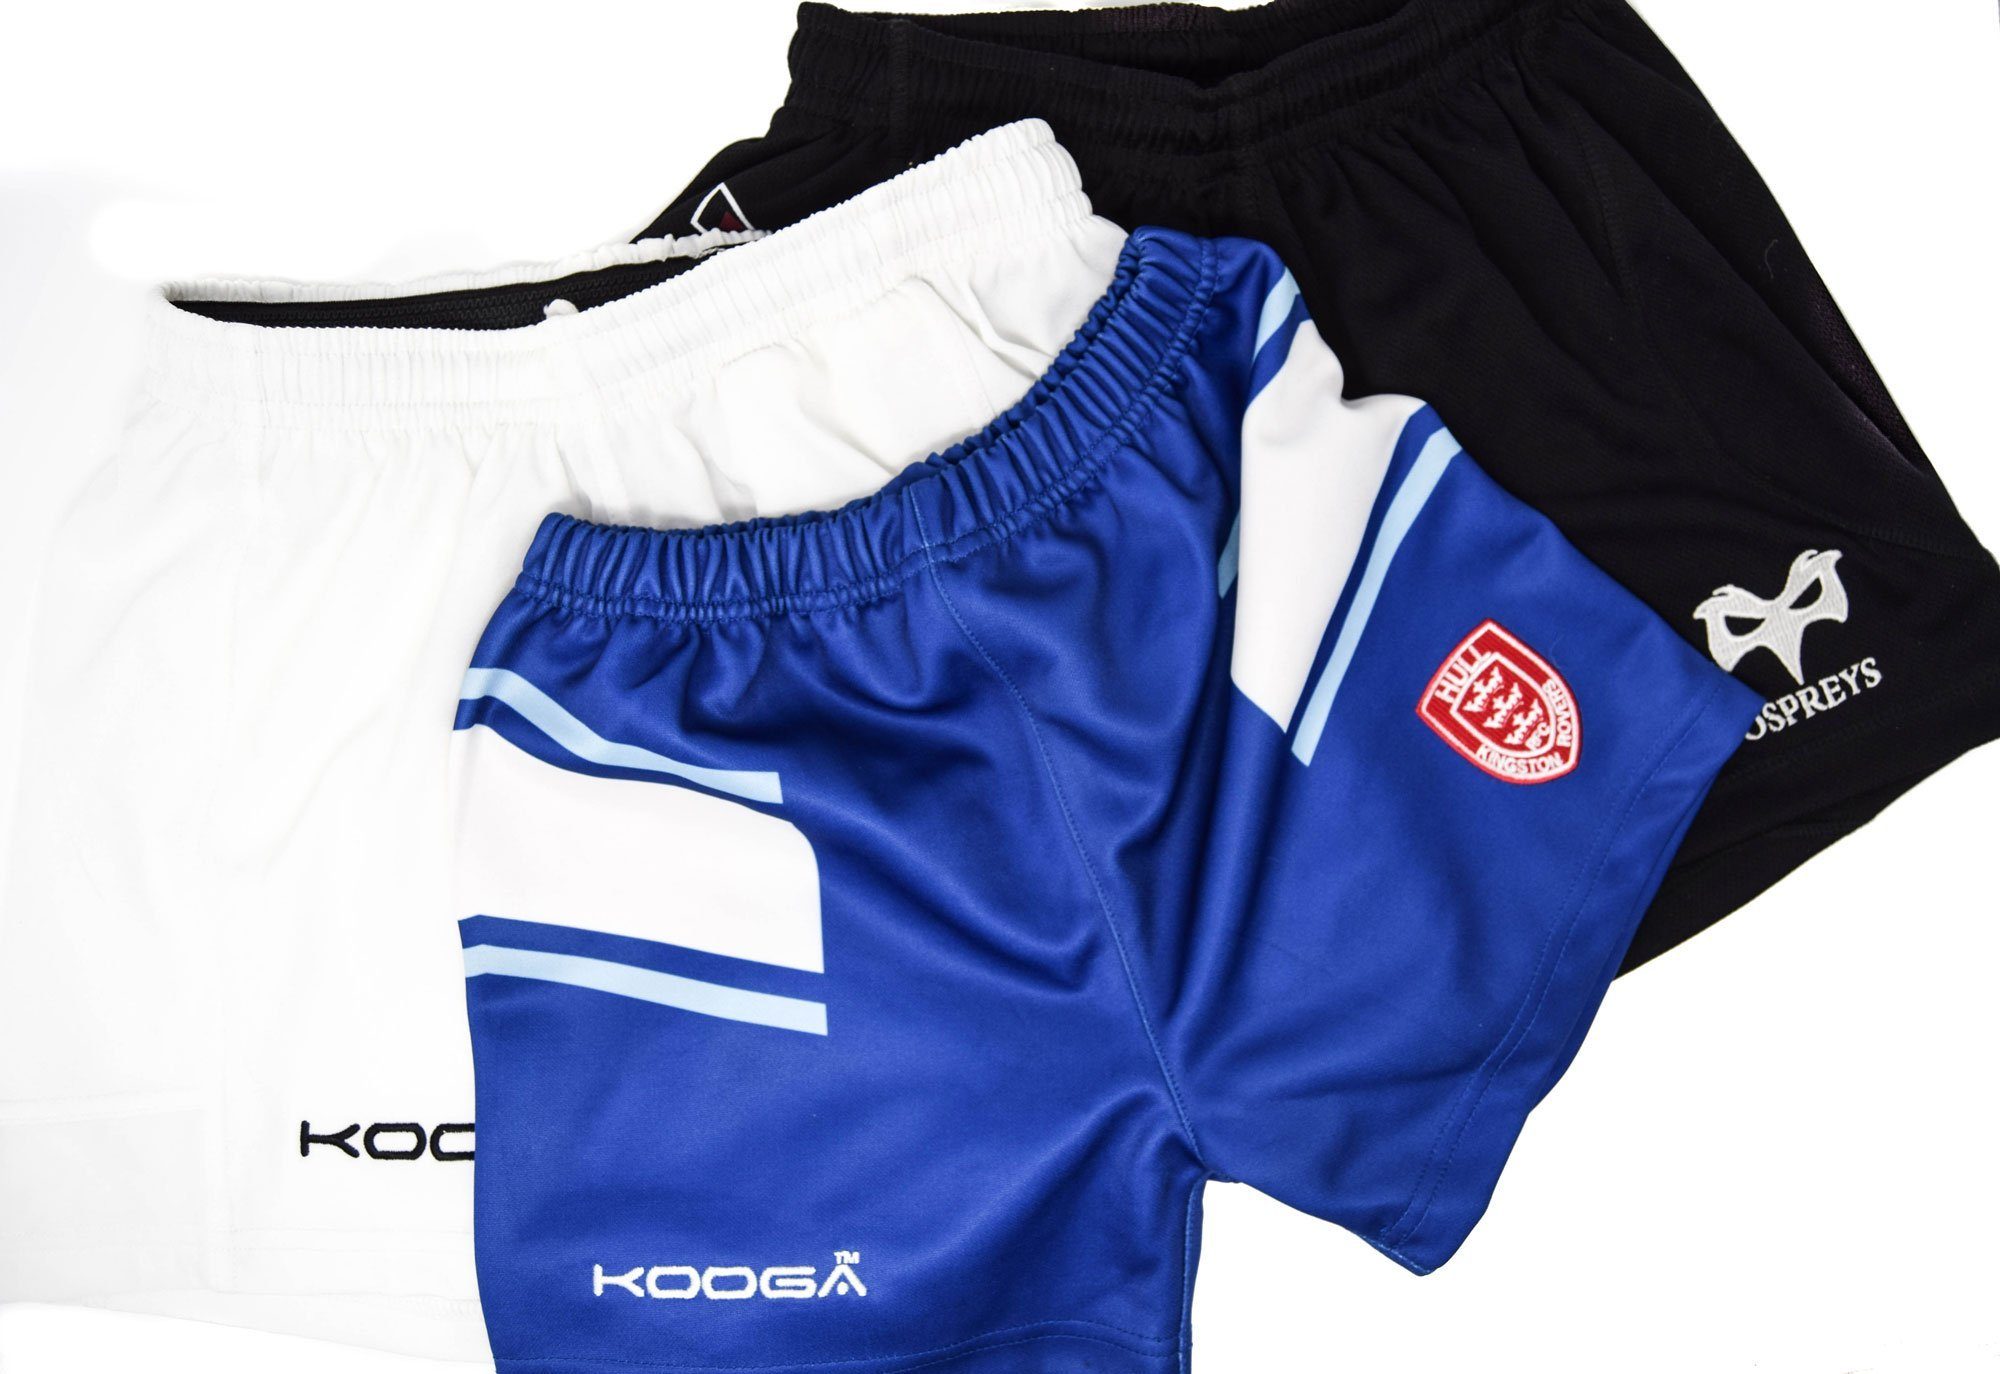 Under Armour Nitro Rugby - Ruggers Rugby Supply